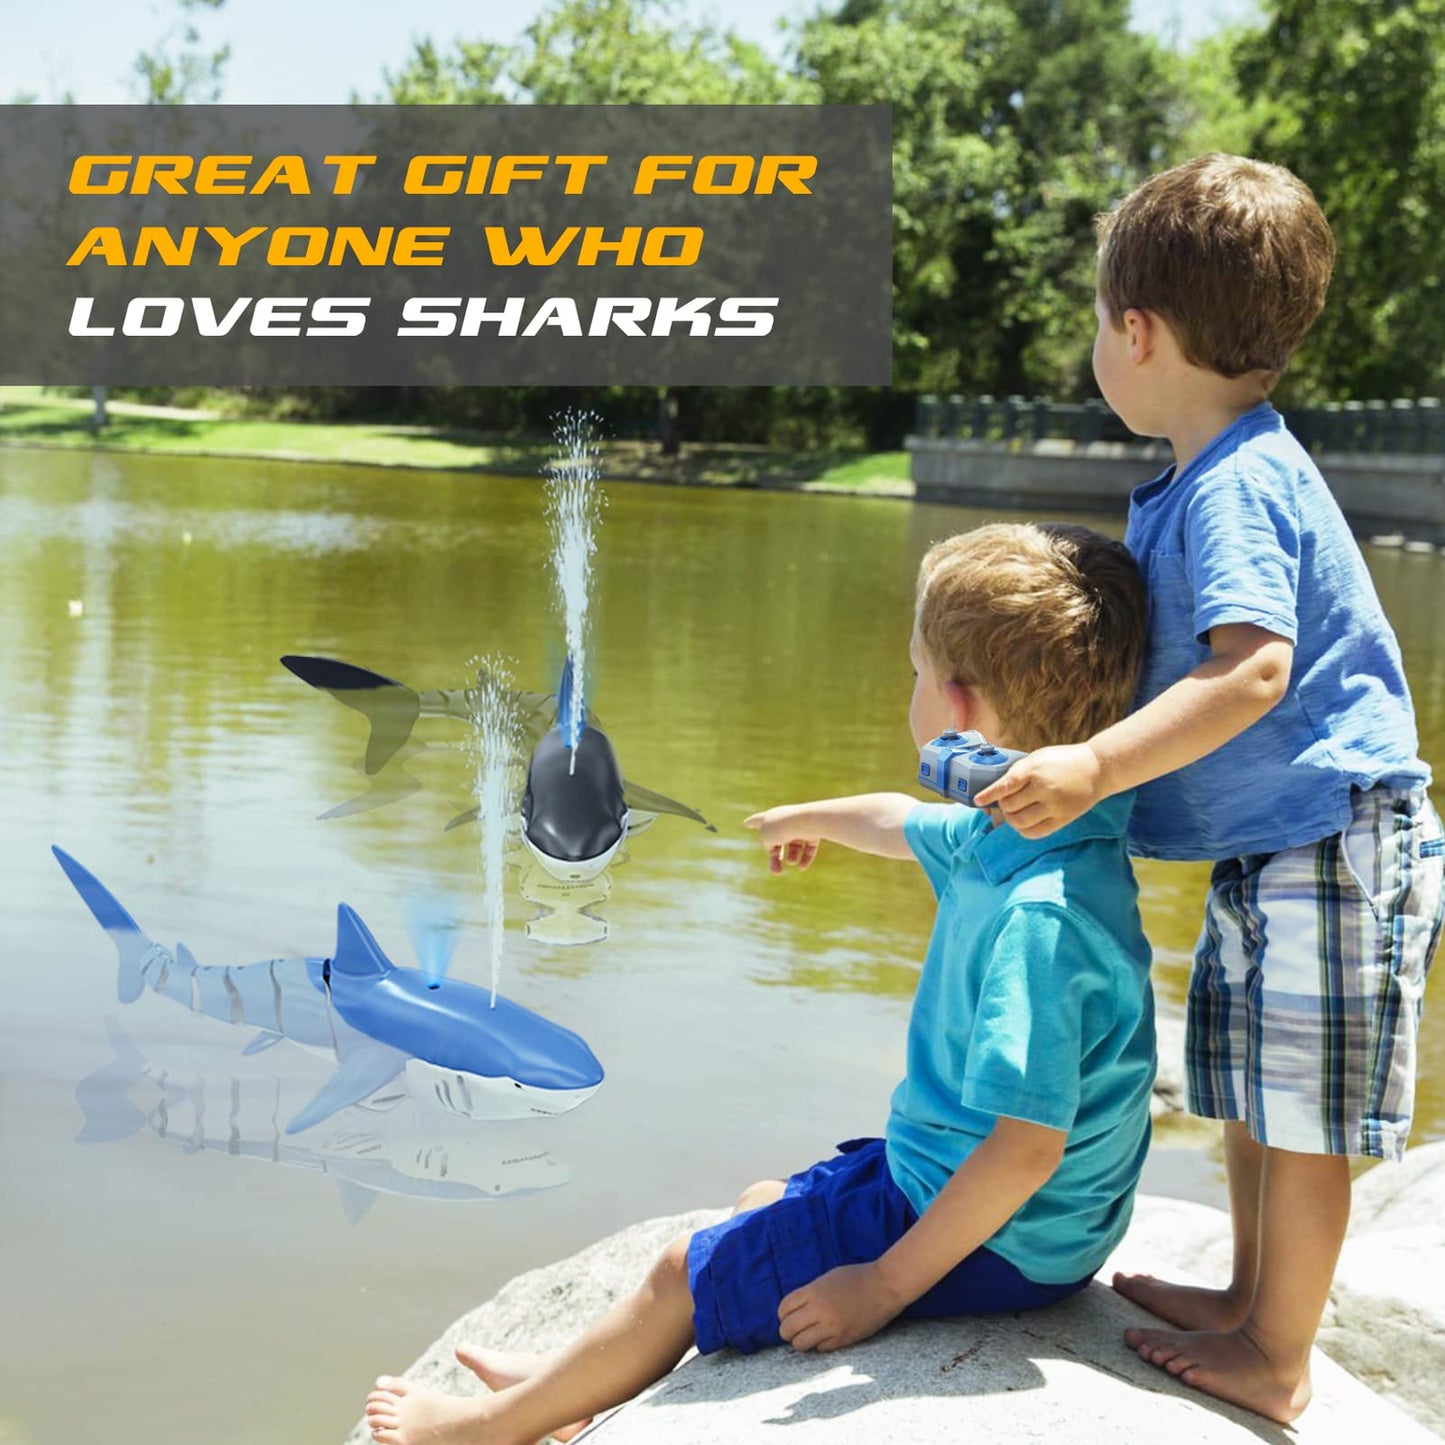 SHARKS ARE A GREAT GIFT FOR